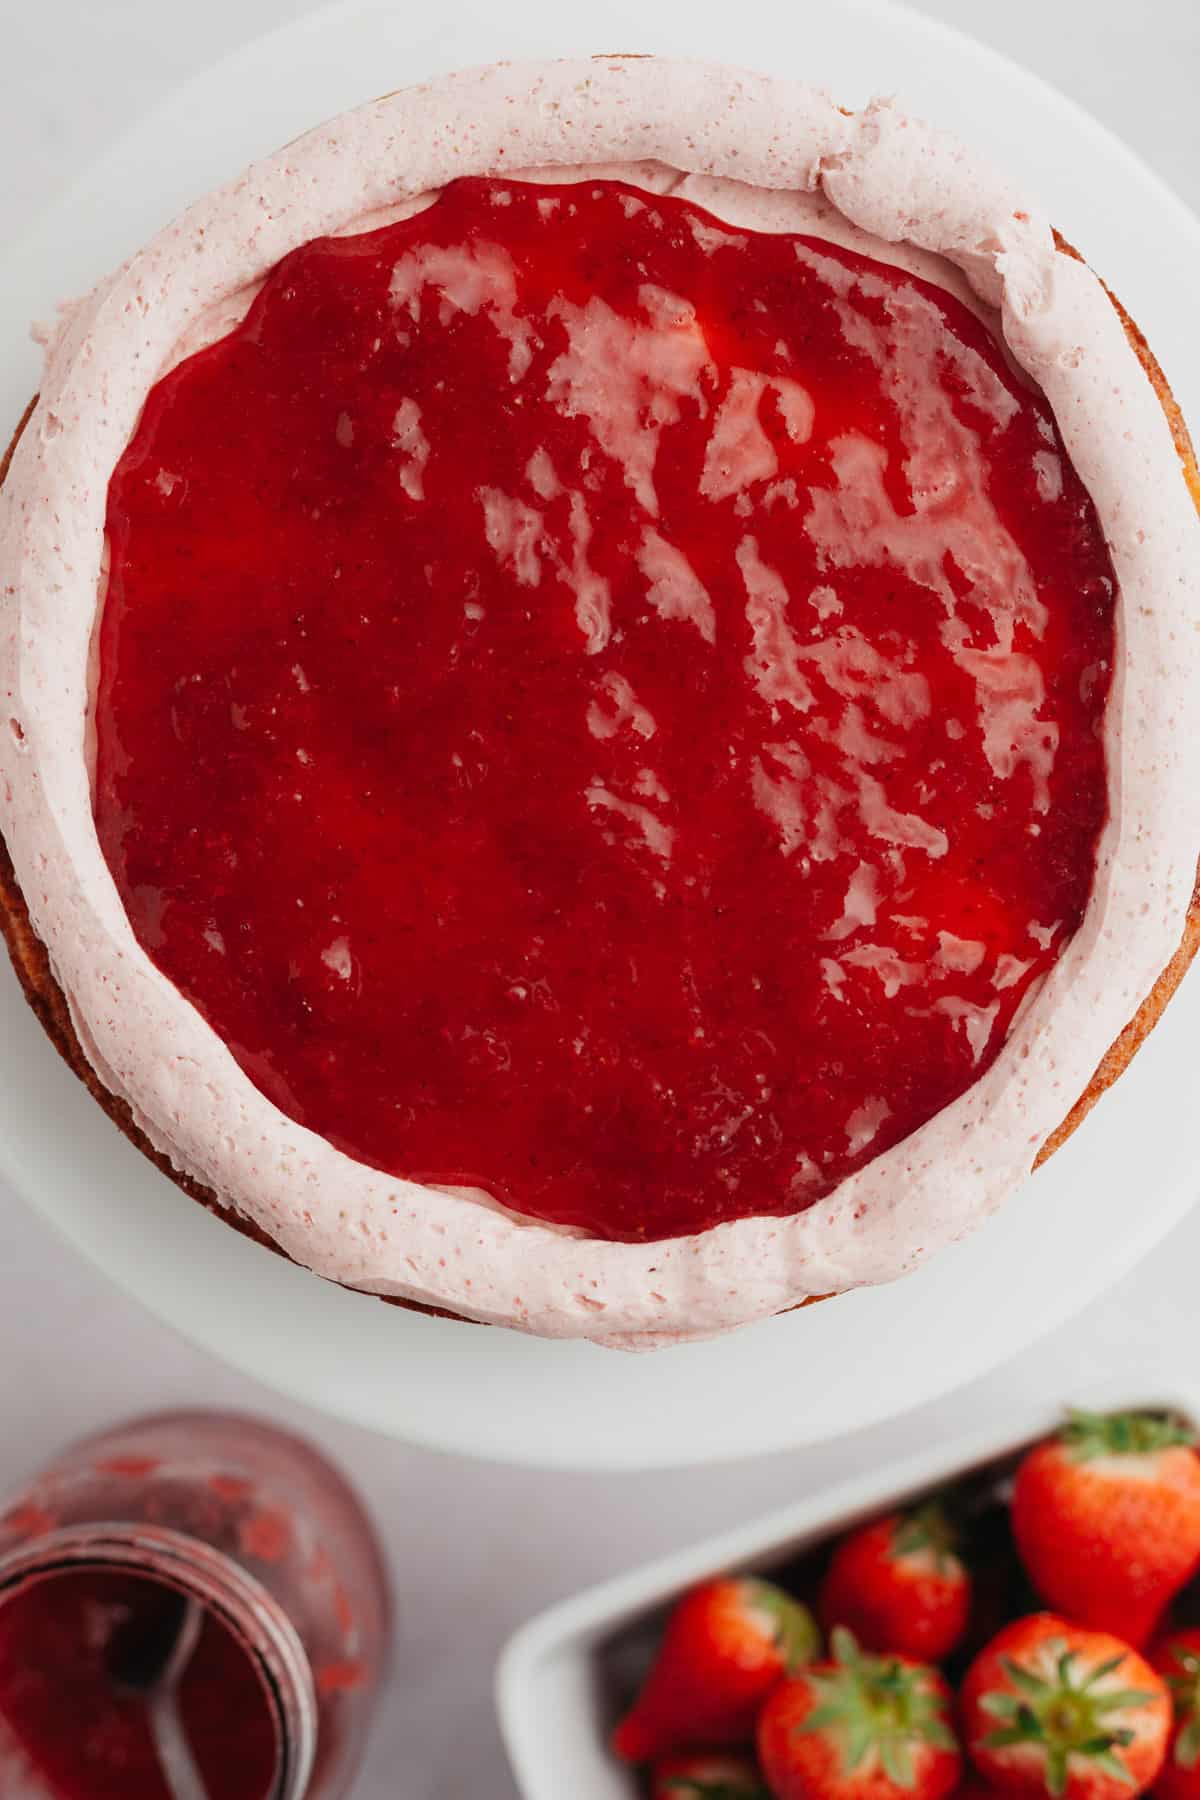 A cake layer covered in strawberry sauce.